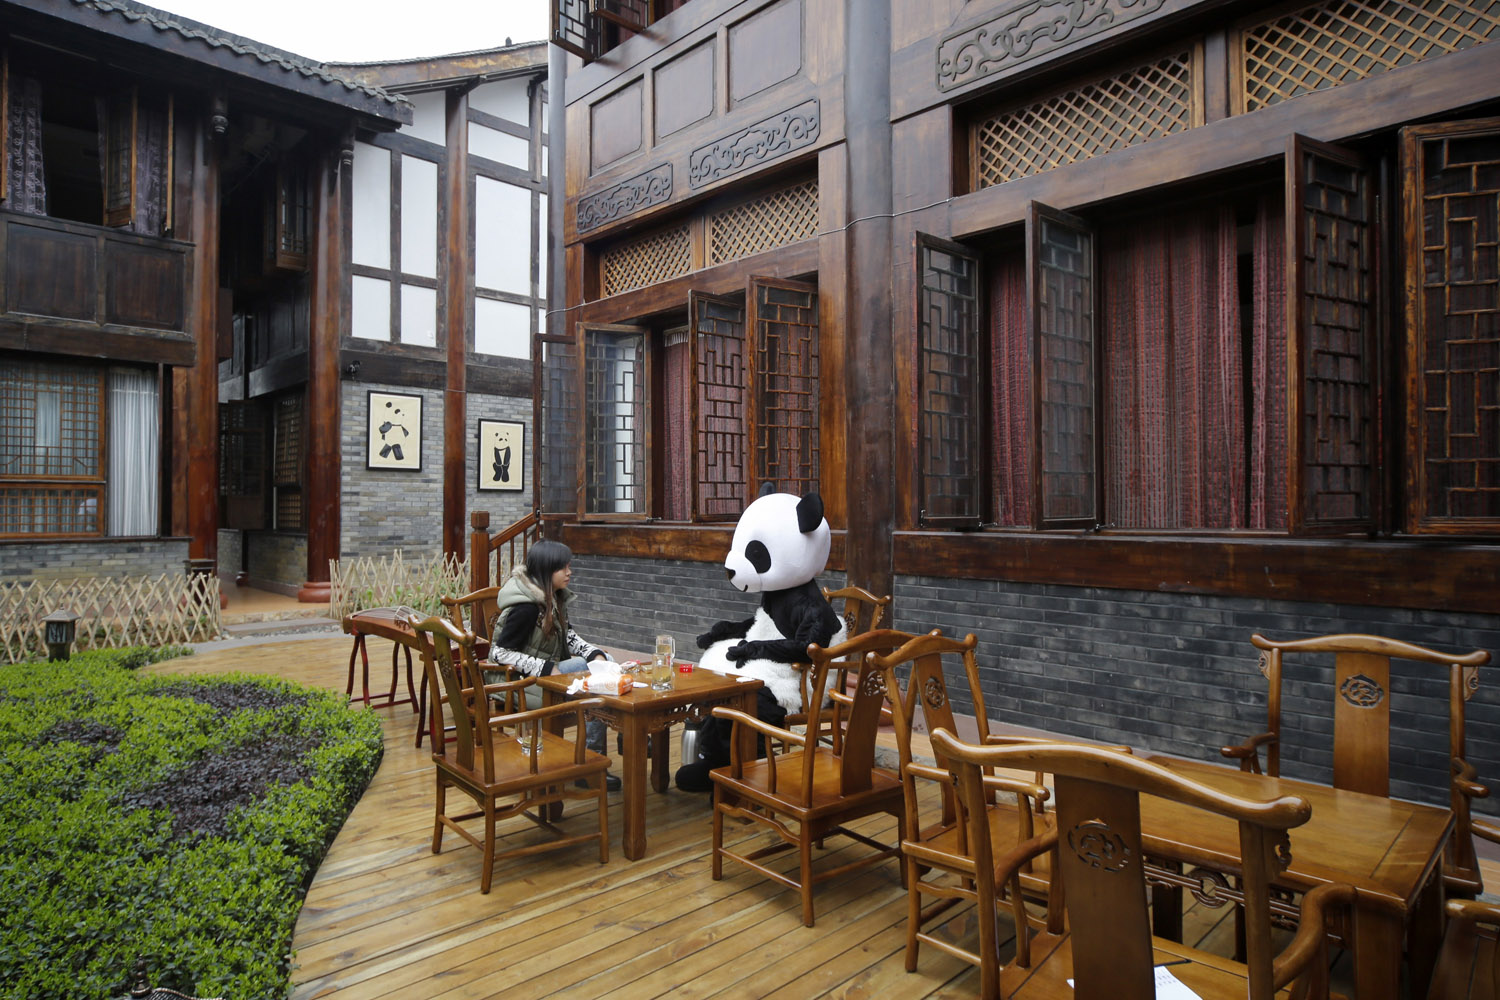 Feb. 22, 2013. An employee wears a panda suit while talking to a woman at a panda-themed hotel at the foot of Emei Mountain in Emeishan, southwest China's Sichuan province.